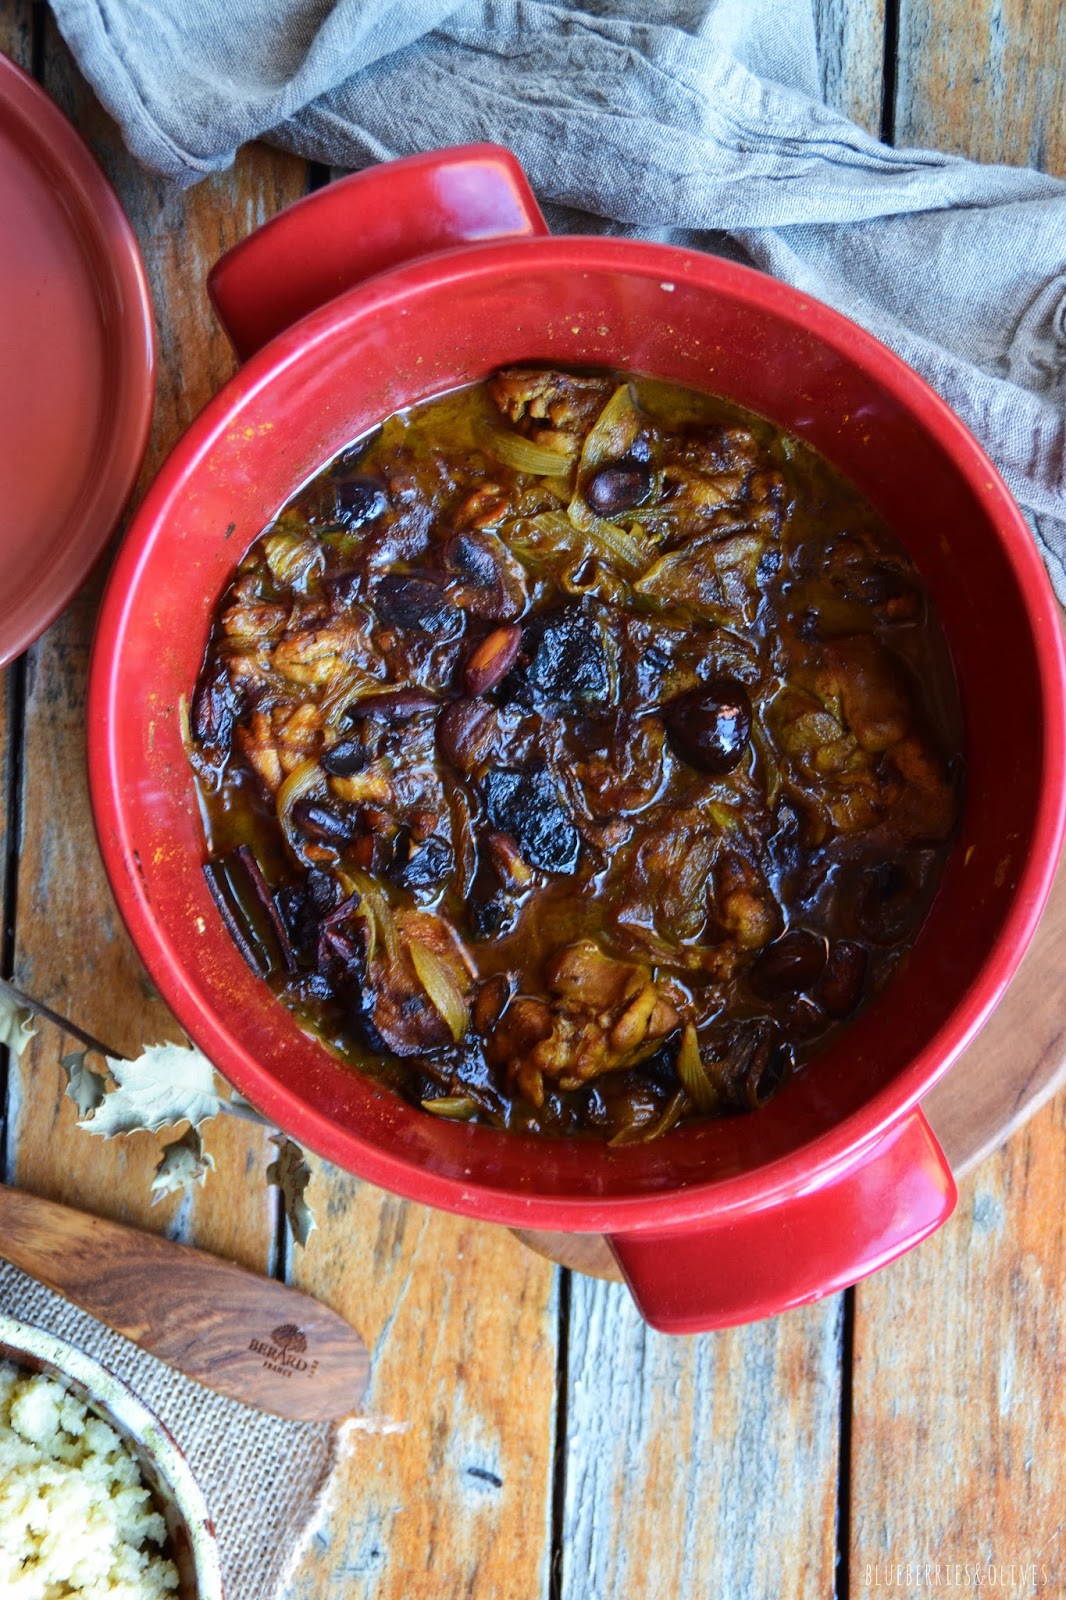 CHICKEN STEW IN COCOTTE WITH CHESTNUTS, PRUNES AND ALMONDS